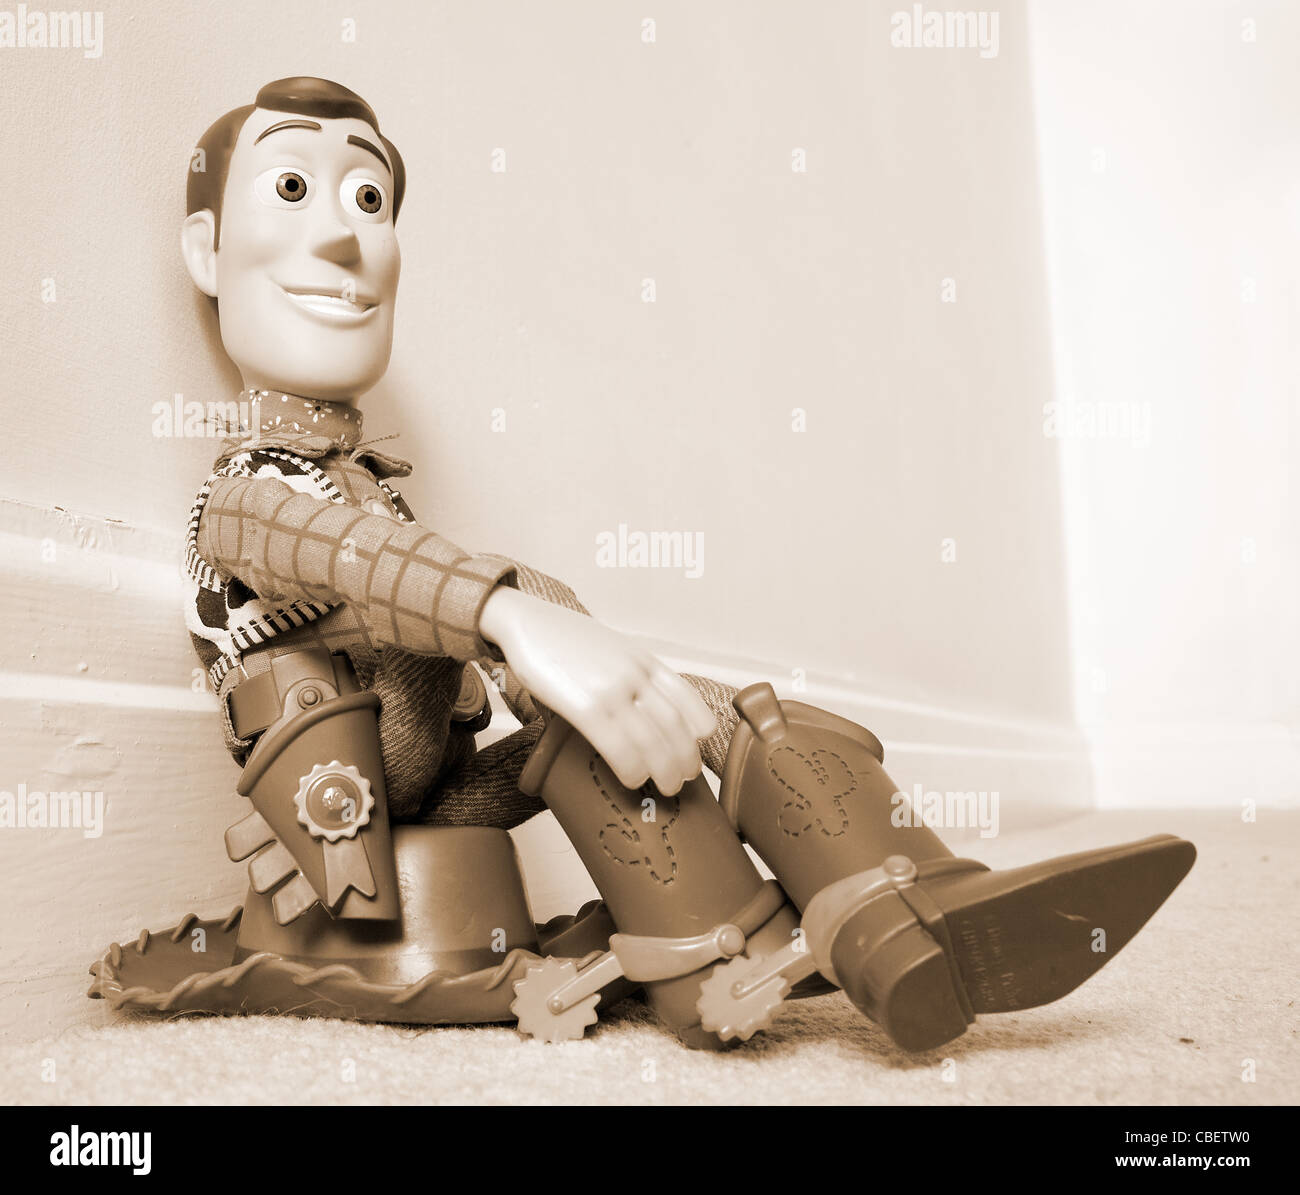 Toys Story Woody